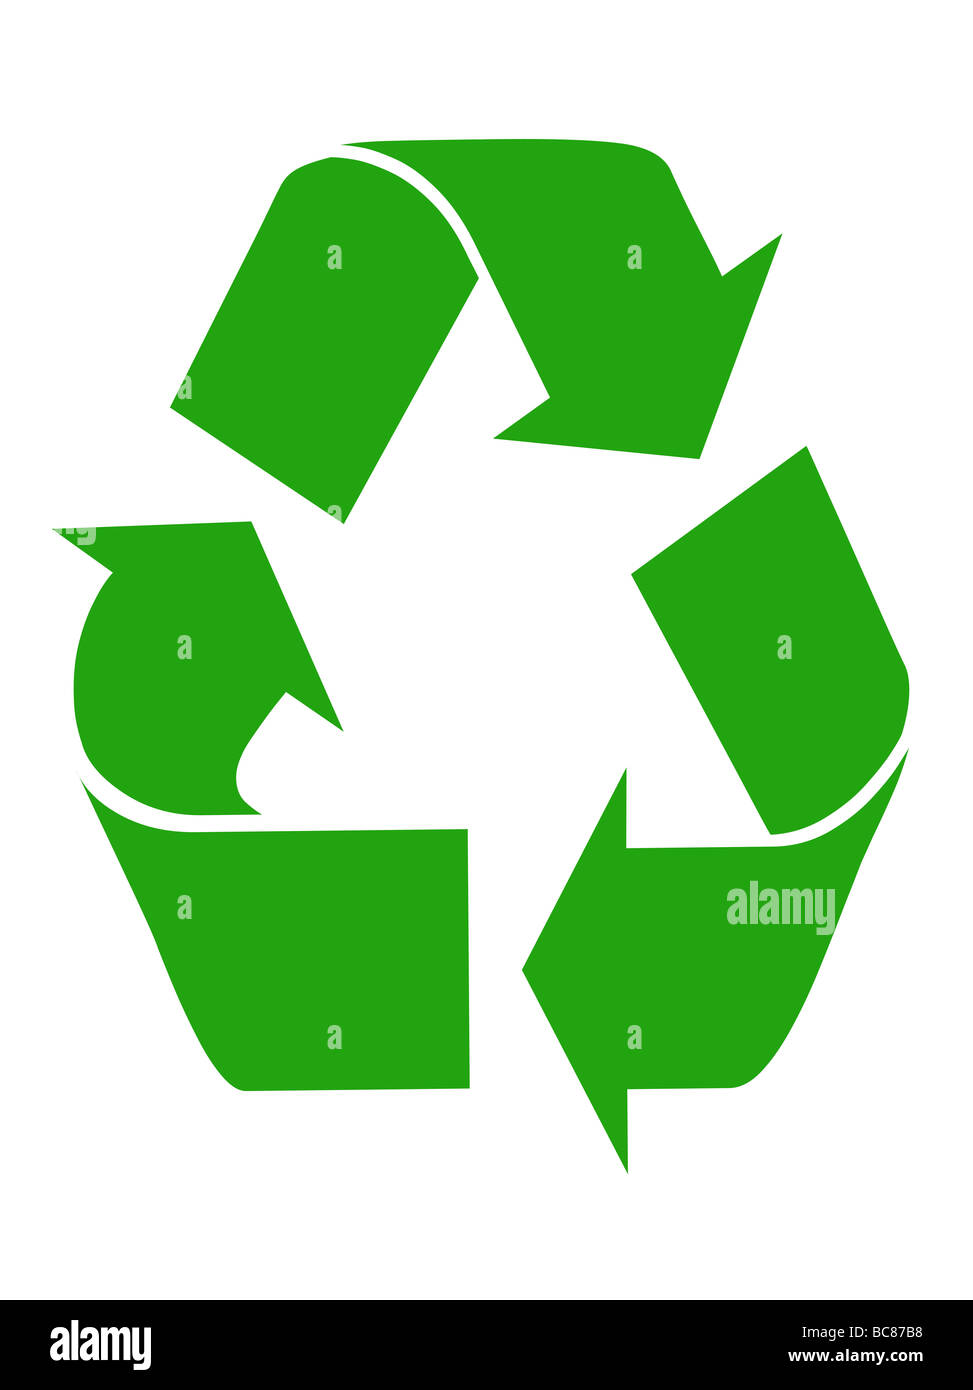 Green recycling symbol isolated on white background Stock Photo